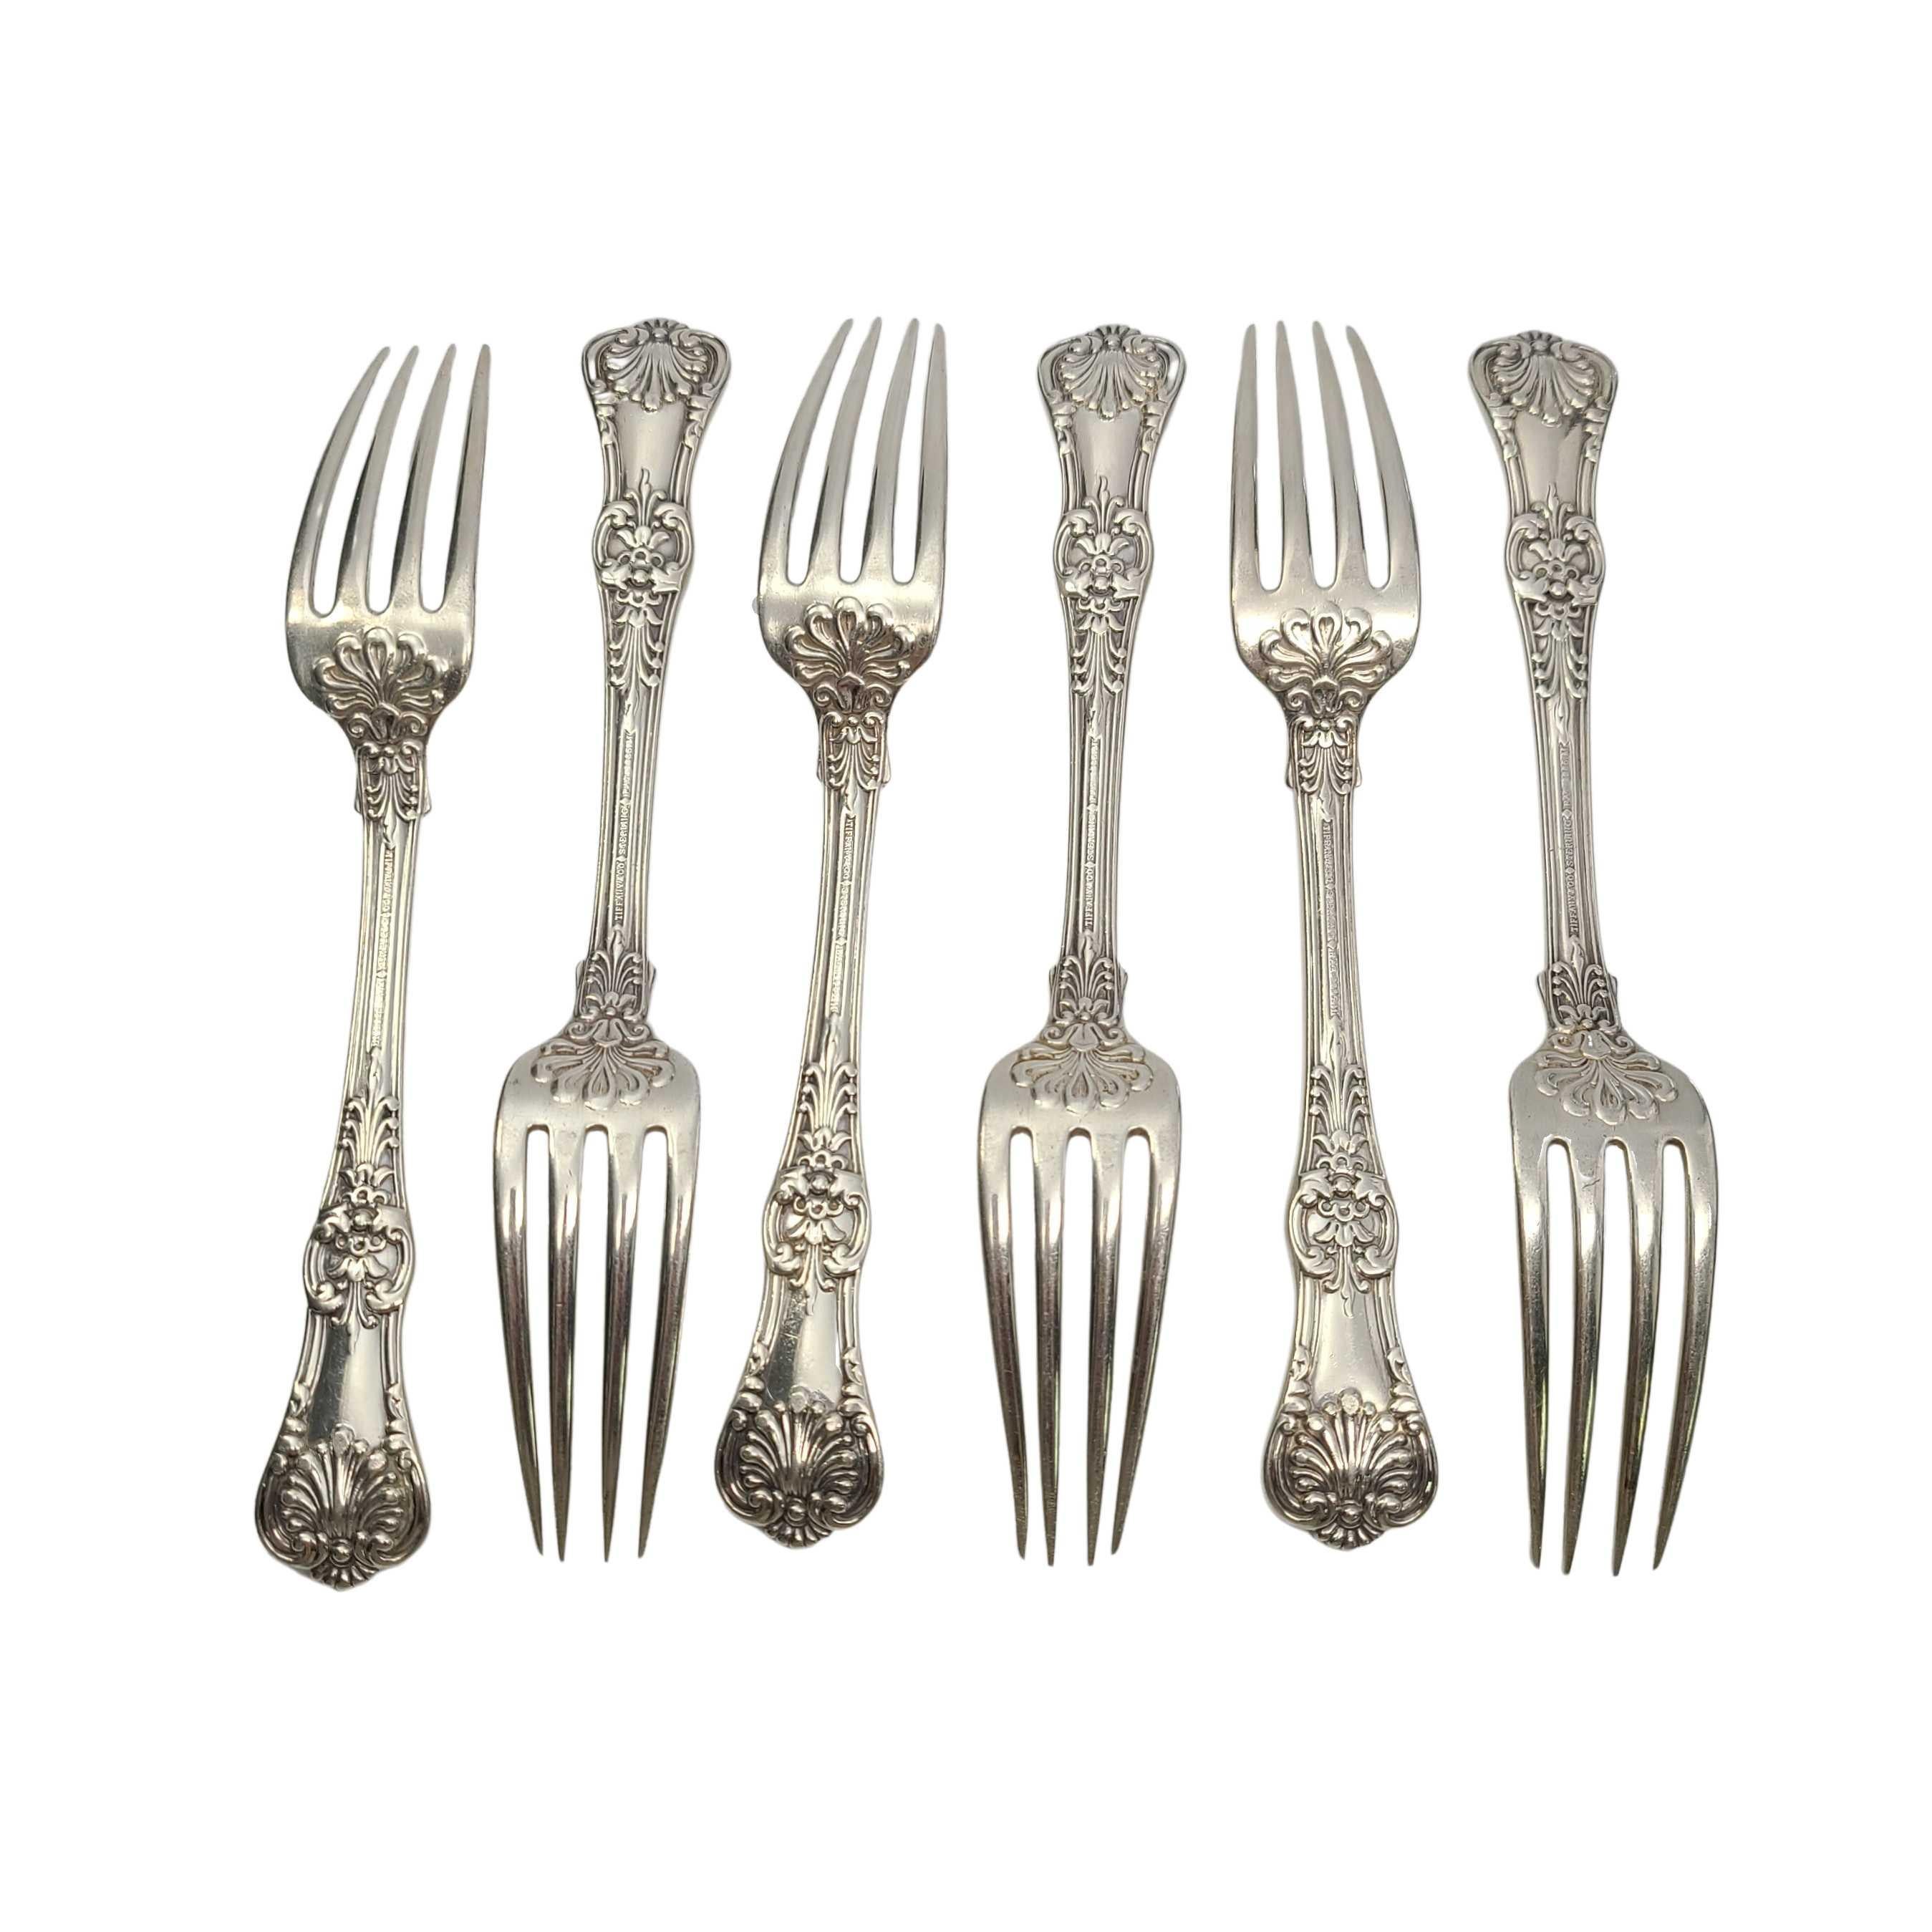 Set of 6 antique sterling silver forks by Tiffany & Co in the English King pattern.

Monogram appears to be DH (see photos).

Beautiful smaller forks in Tiffany's intricate and decorative version of a King pattern which were very popular in the